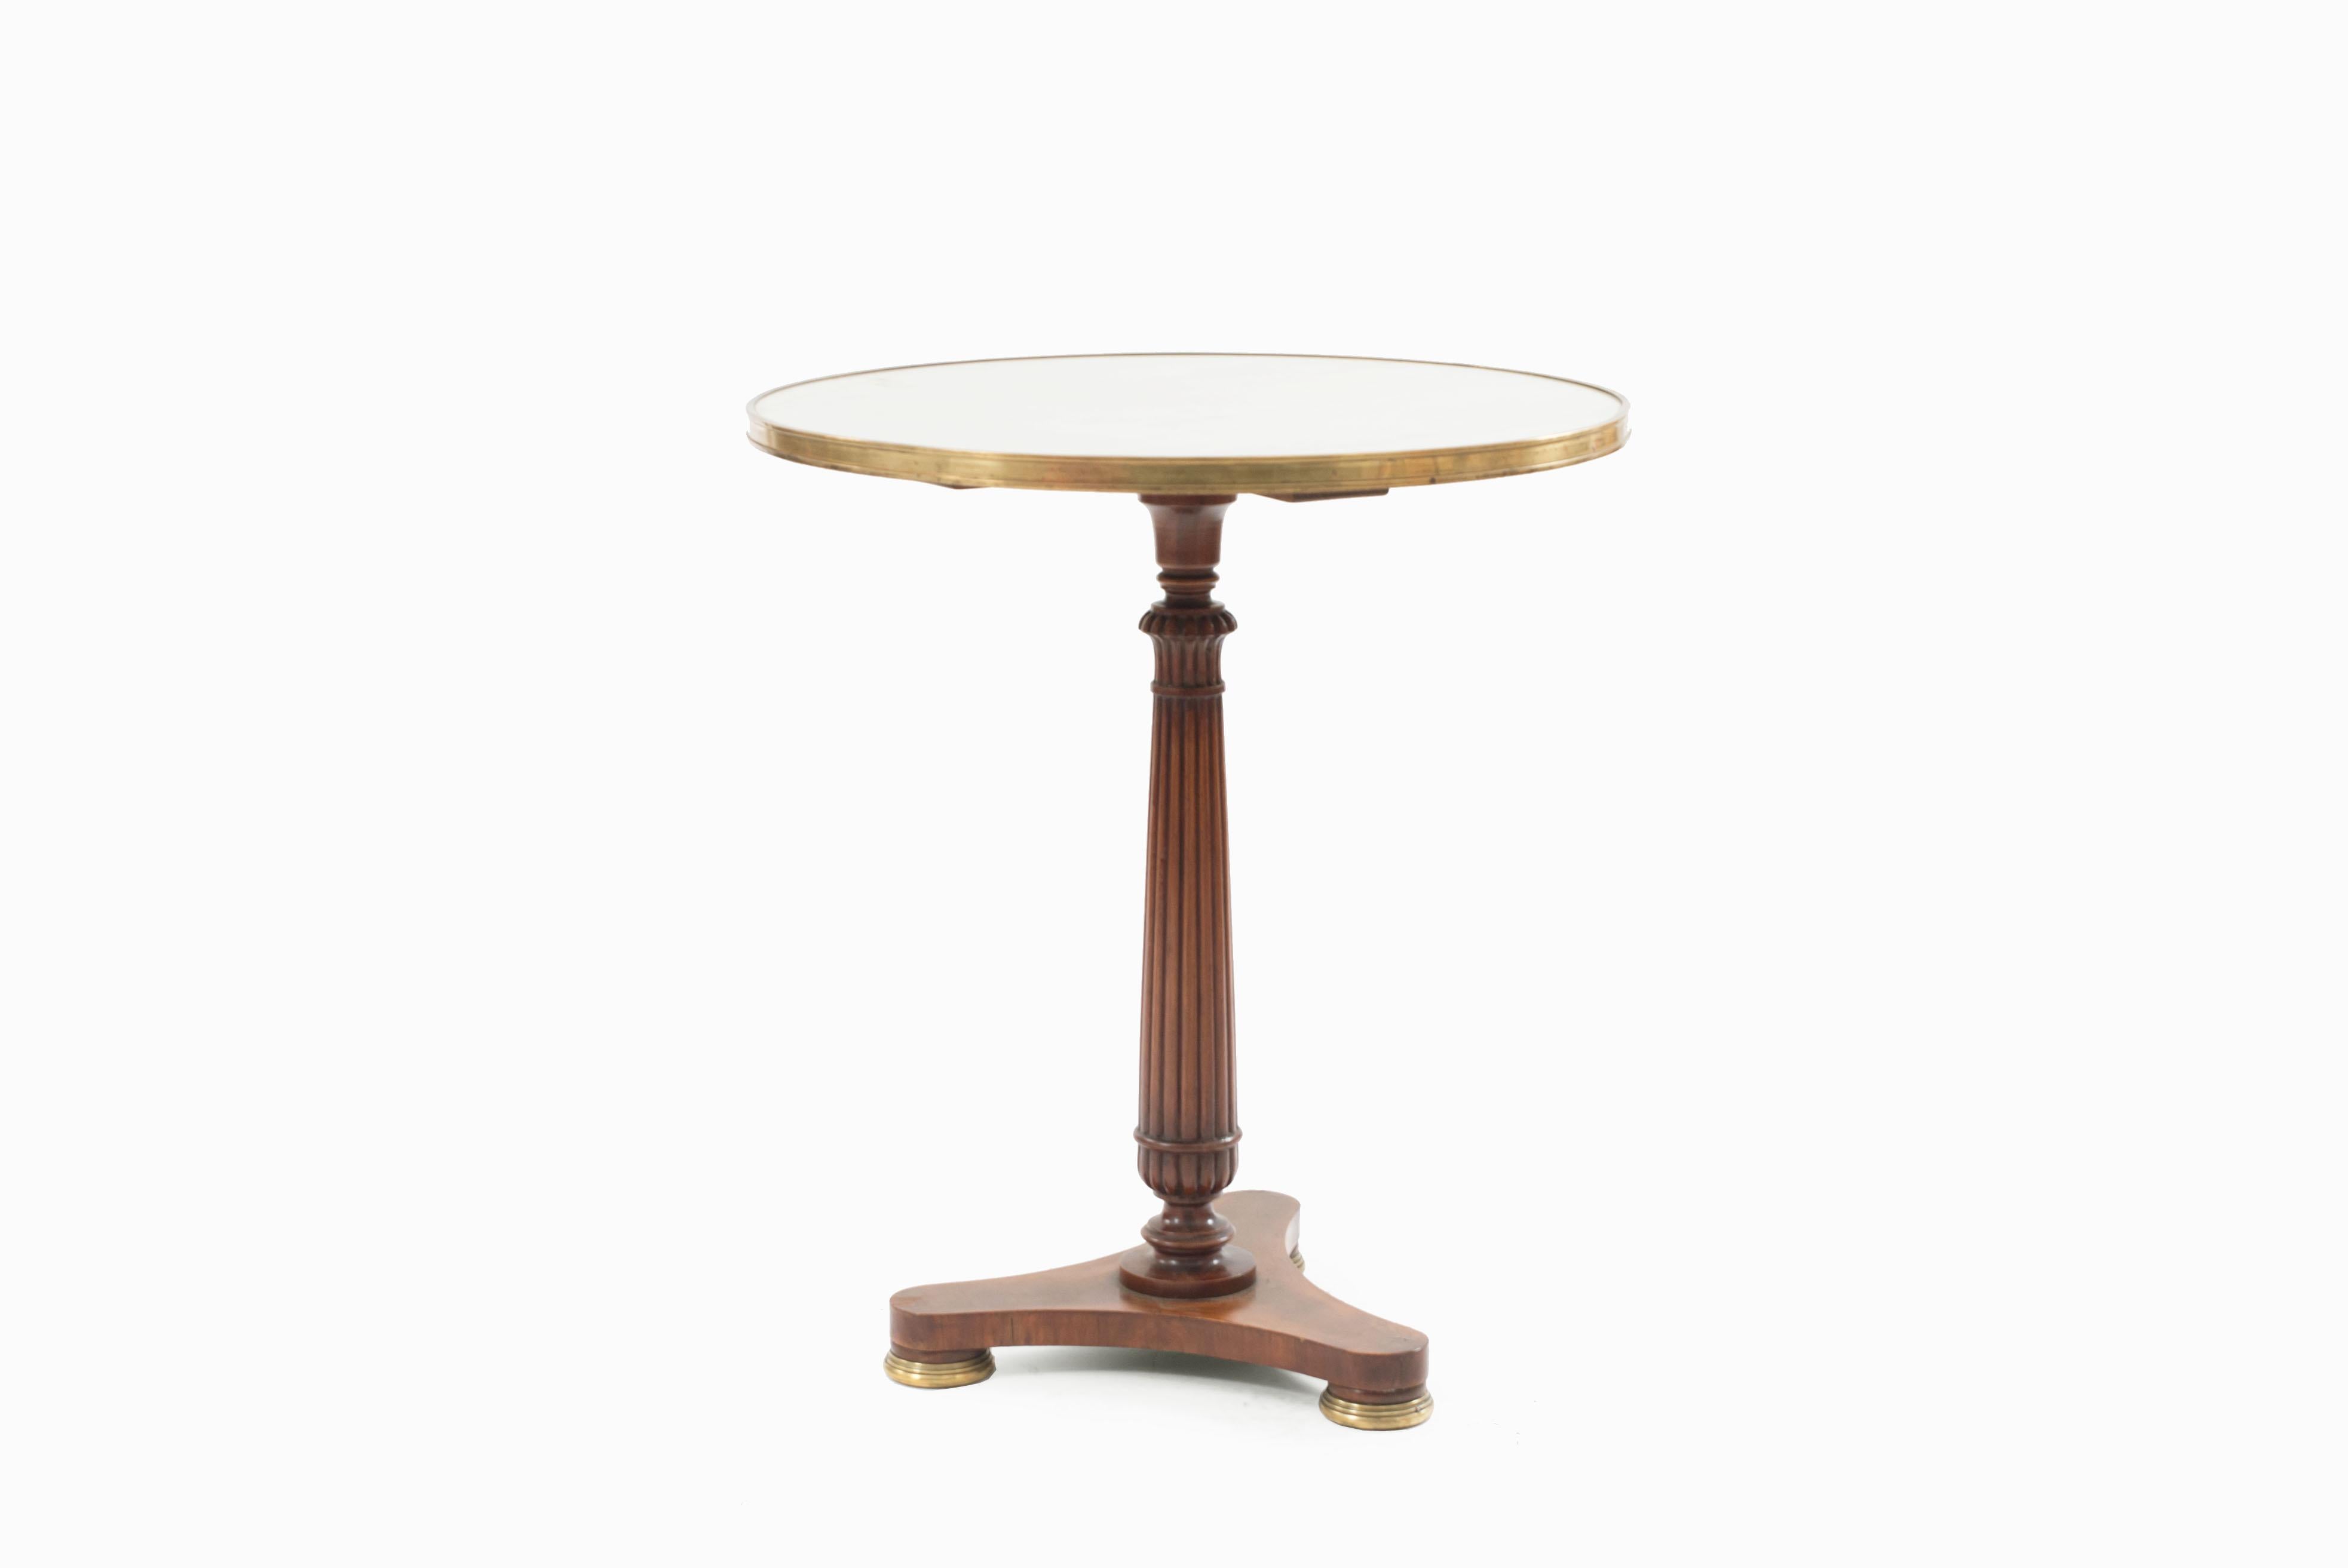 Pair of French Regence style mahogany end tables / guéridon with inset circular white marble tops, bronze binding, supported on fluted pedestal and resting on tripartite bases, circa 1950.